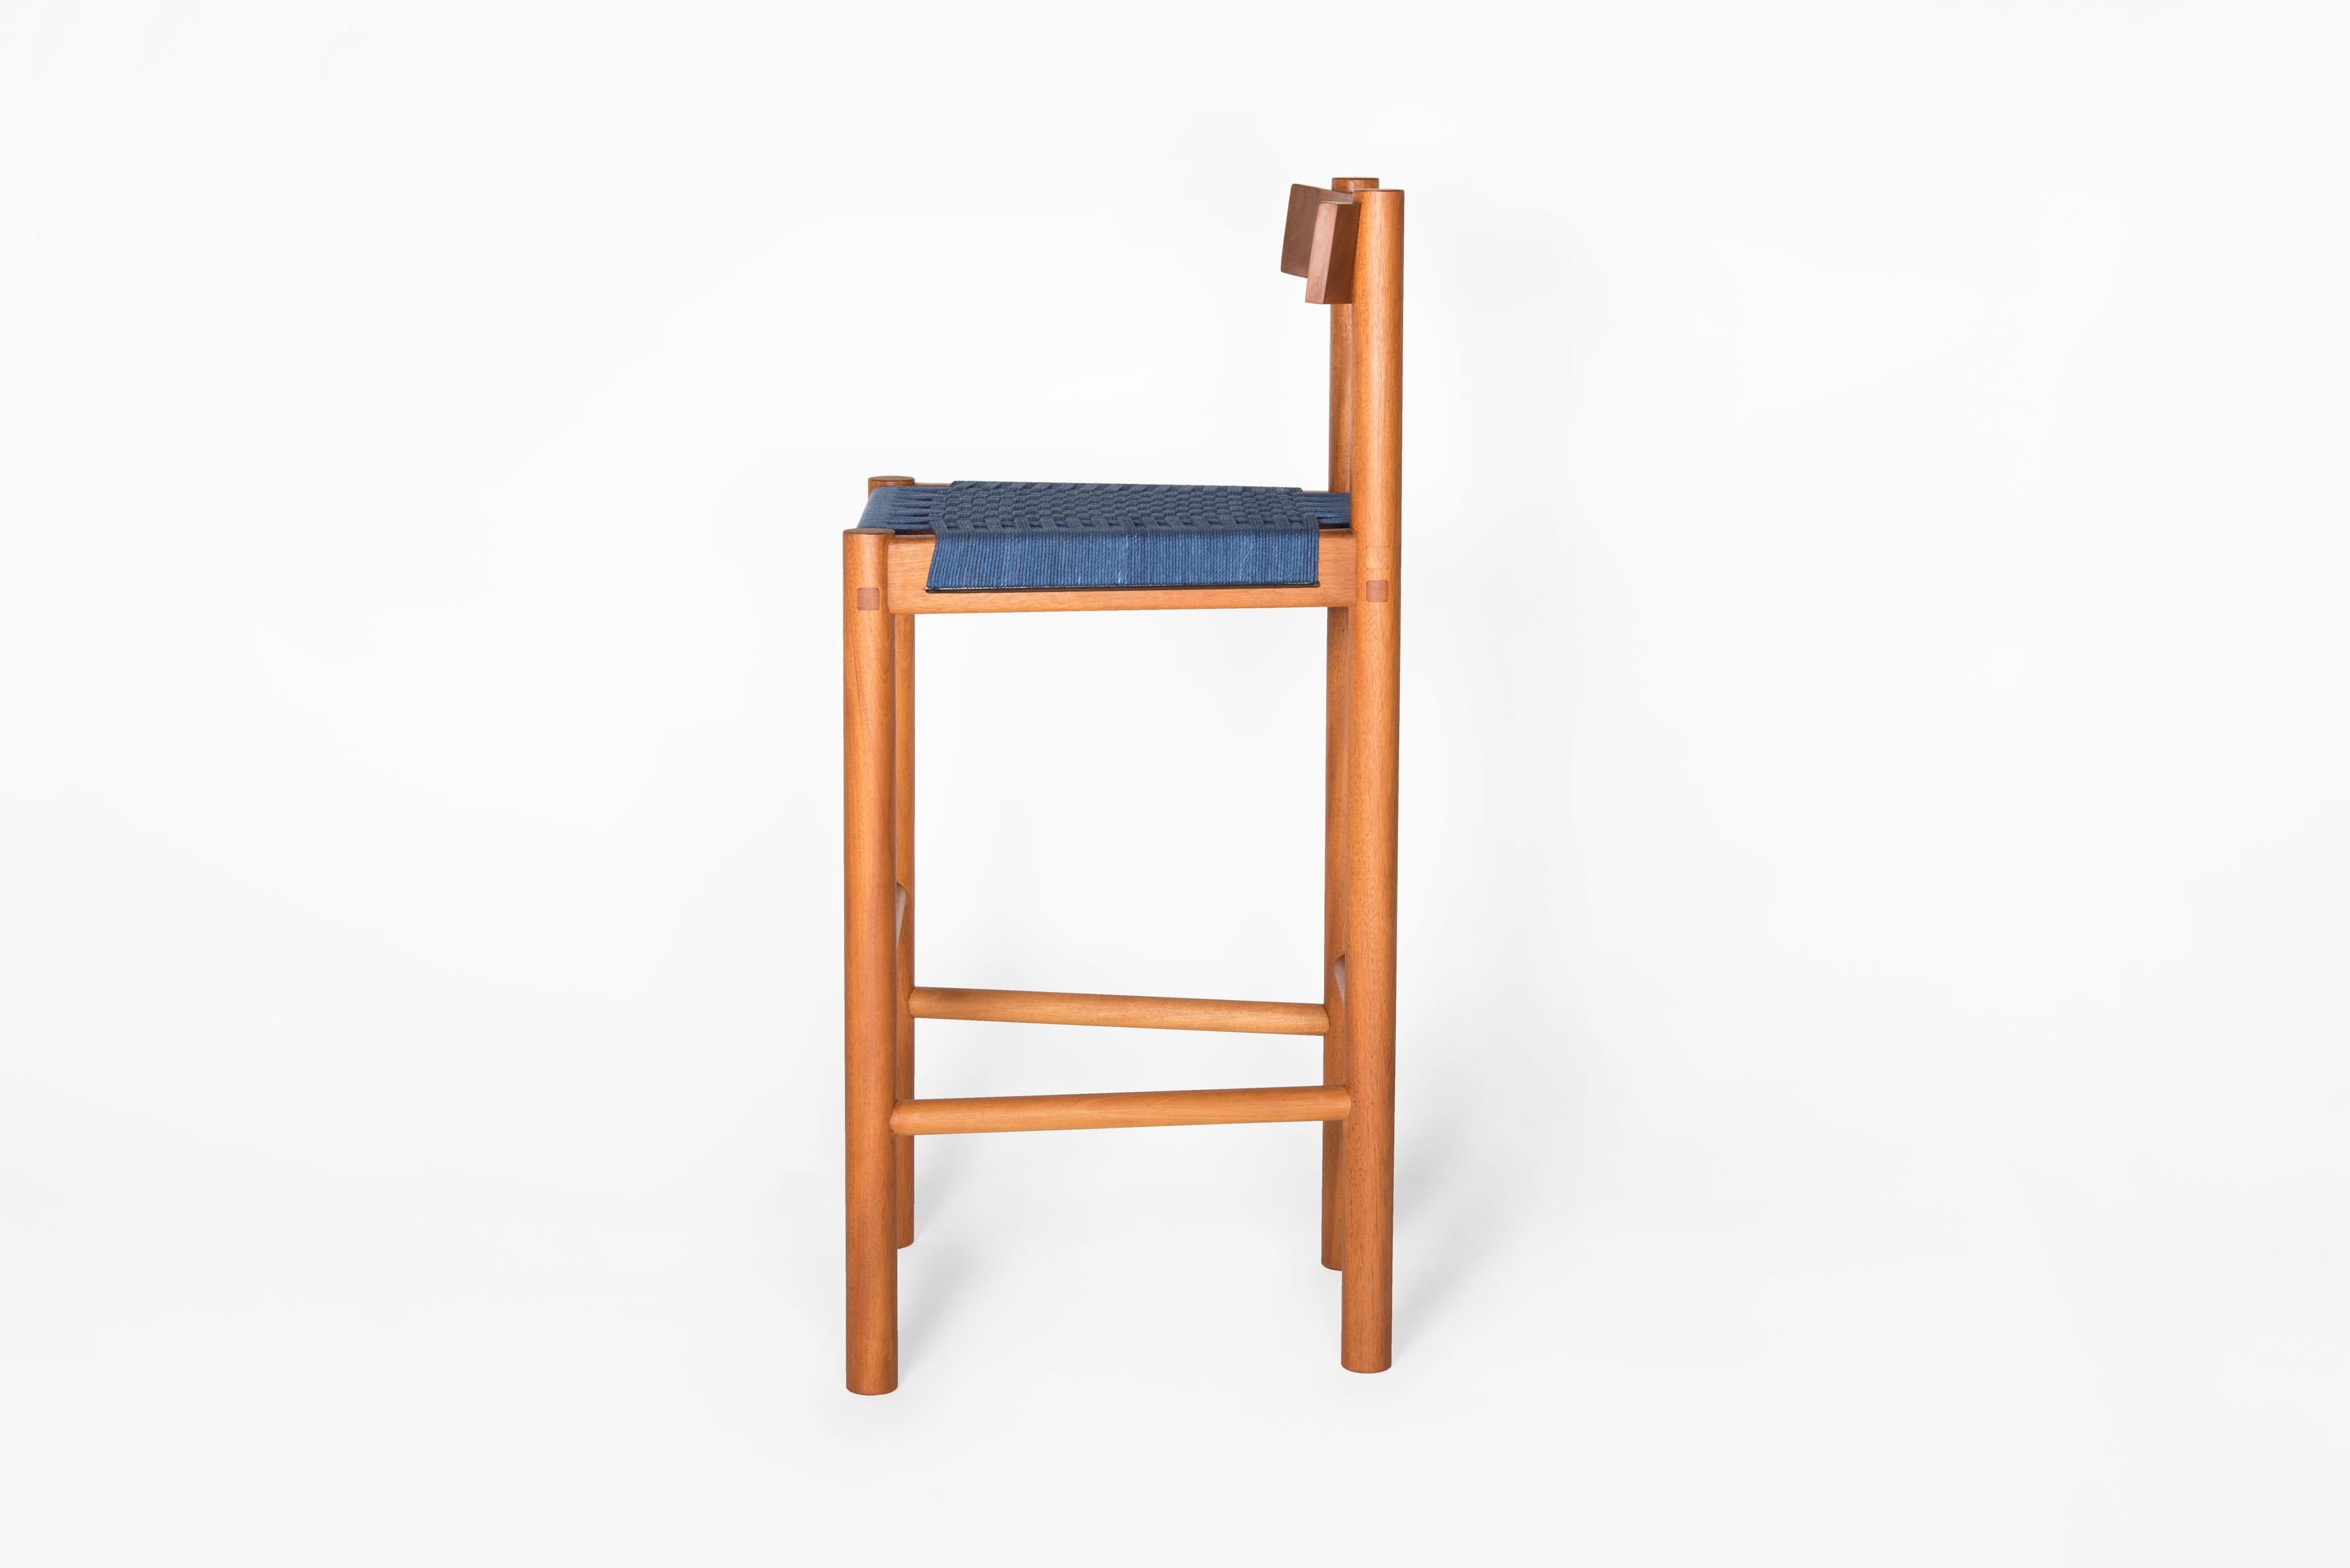 A stool to complement the Sáasil family. Just like the Sáasil Chair, its light but solid structure creates a frame for the handwoven cotton or nylon thread seat. The way the piece is made brings together local talent and richness: the wood is local